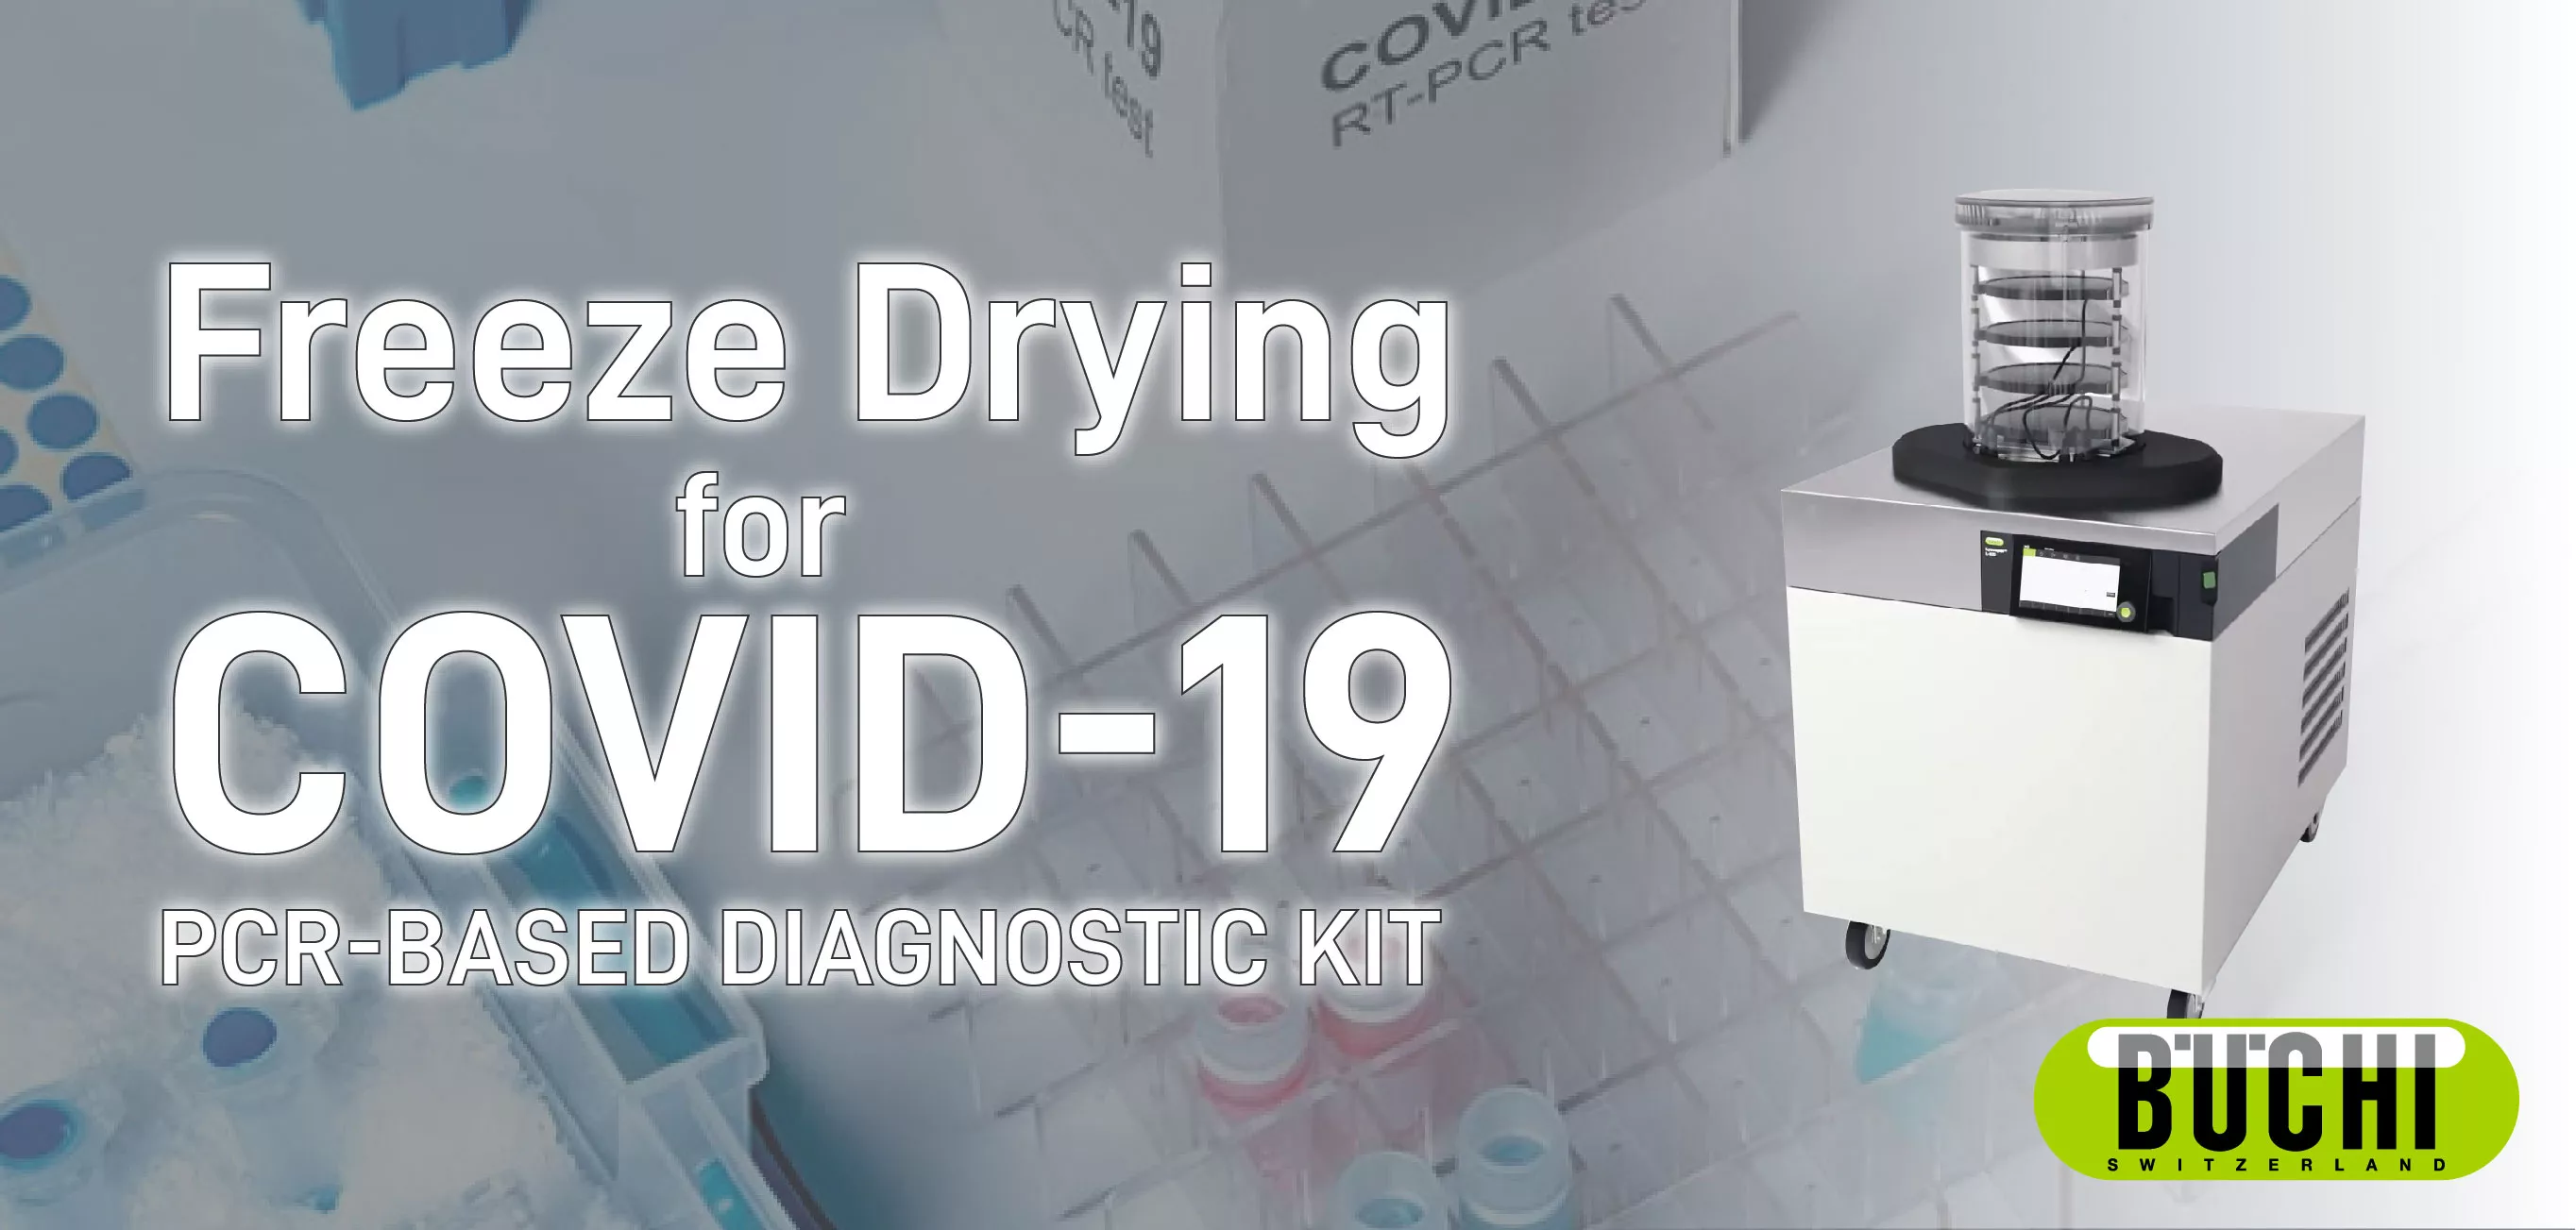 Freeze Drying for COVID-19 PCR-based Diagnostic Kits by BUCHI Webinar